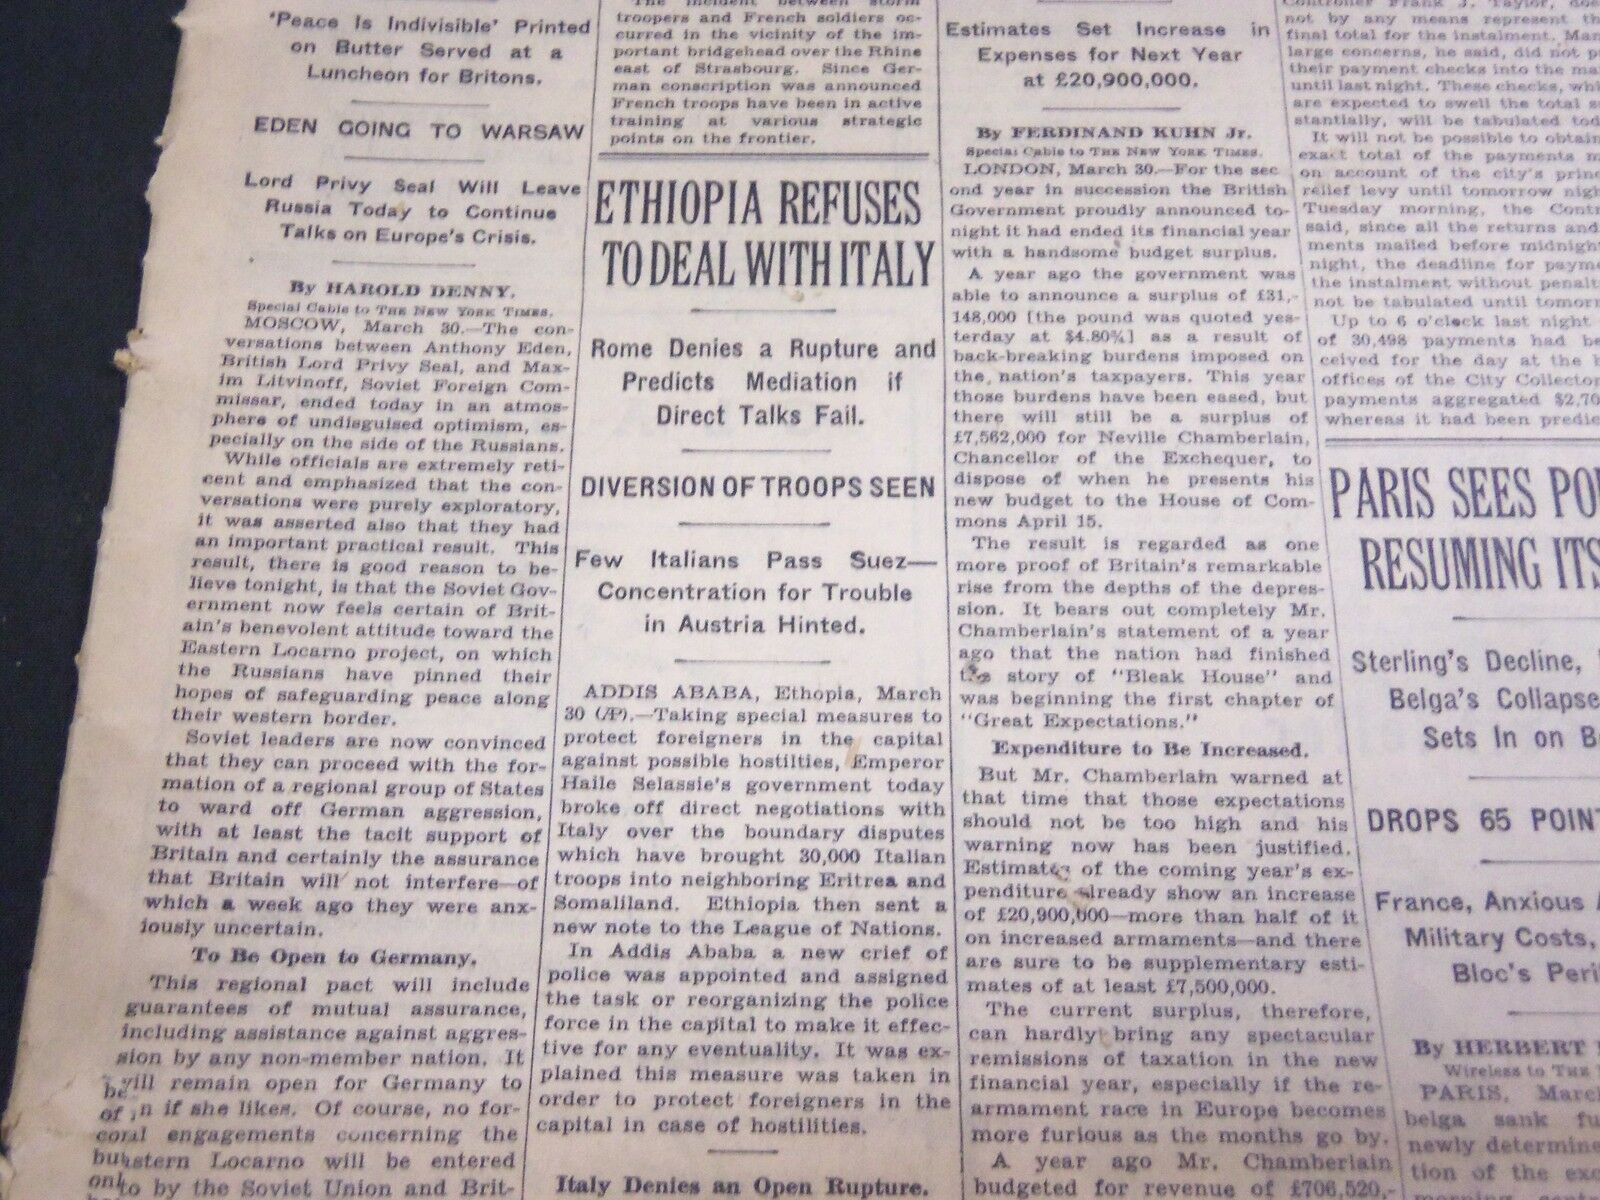 1935 MARCH 31 NEW YORK TIMES - ETHIOPIA REFUSES TO DEAL WITH ITALY - NT 4917